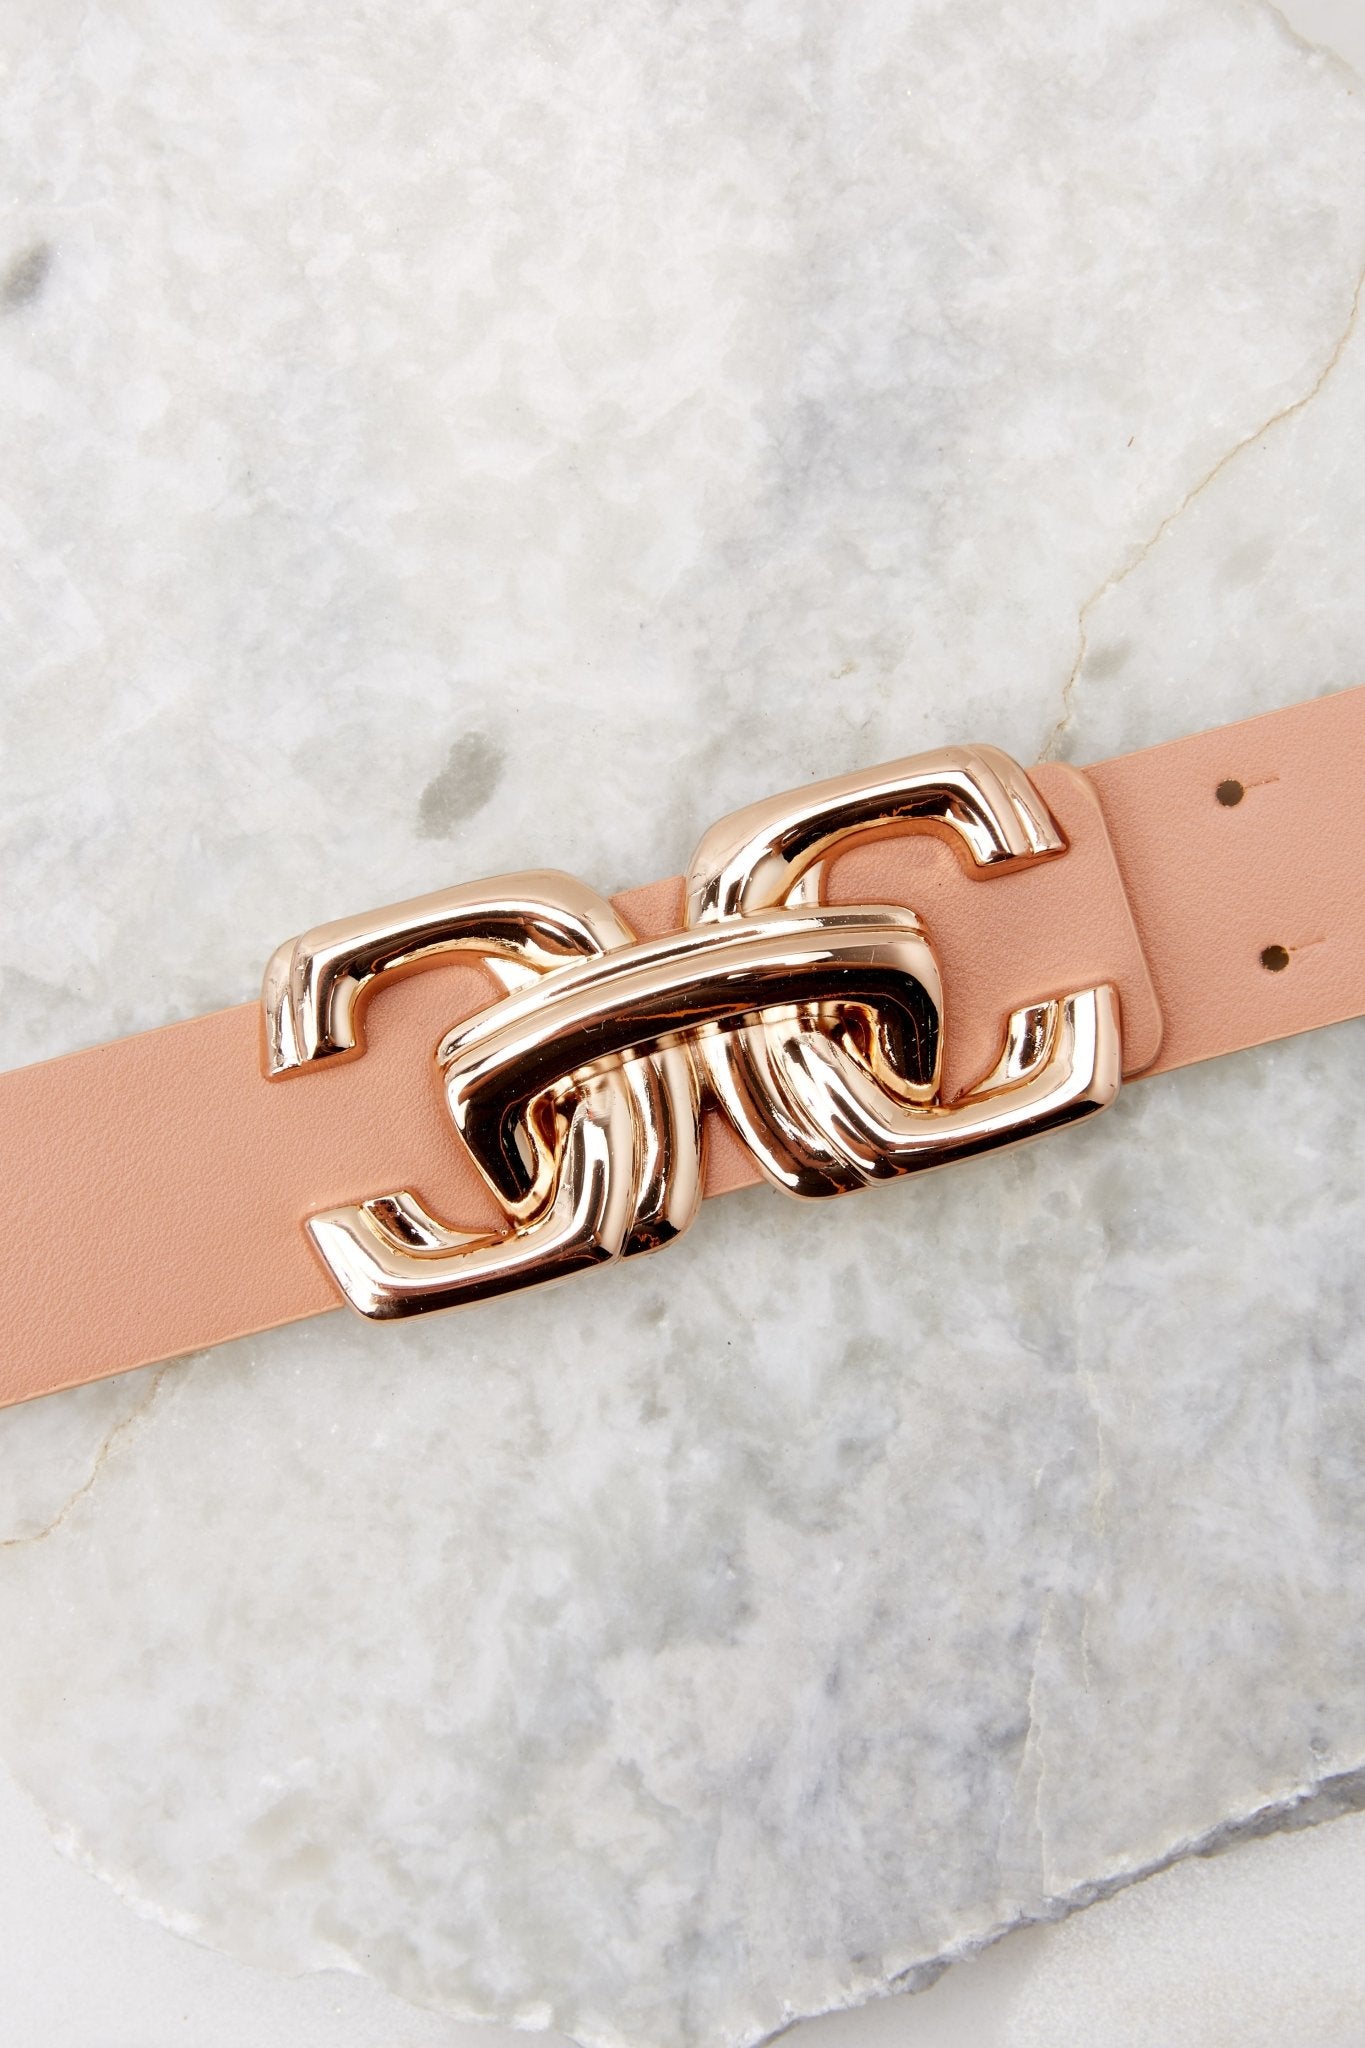 This tan belt features a chain-link buckle closure with two prongs, a soft exterior, and gold hardware. 